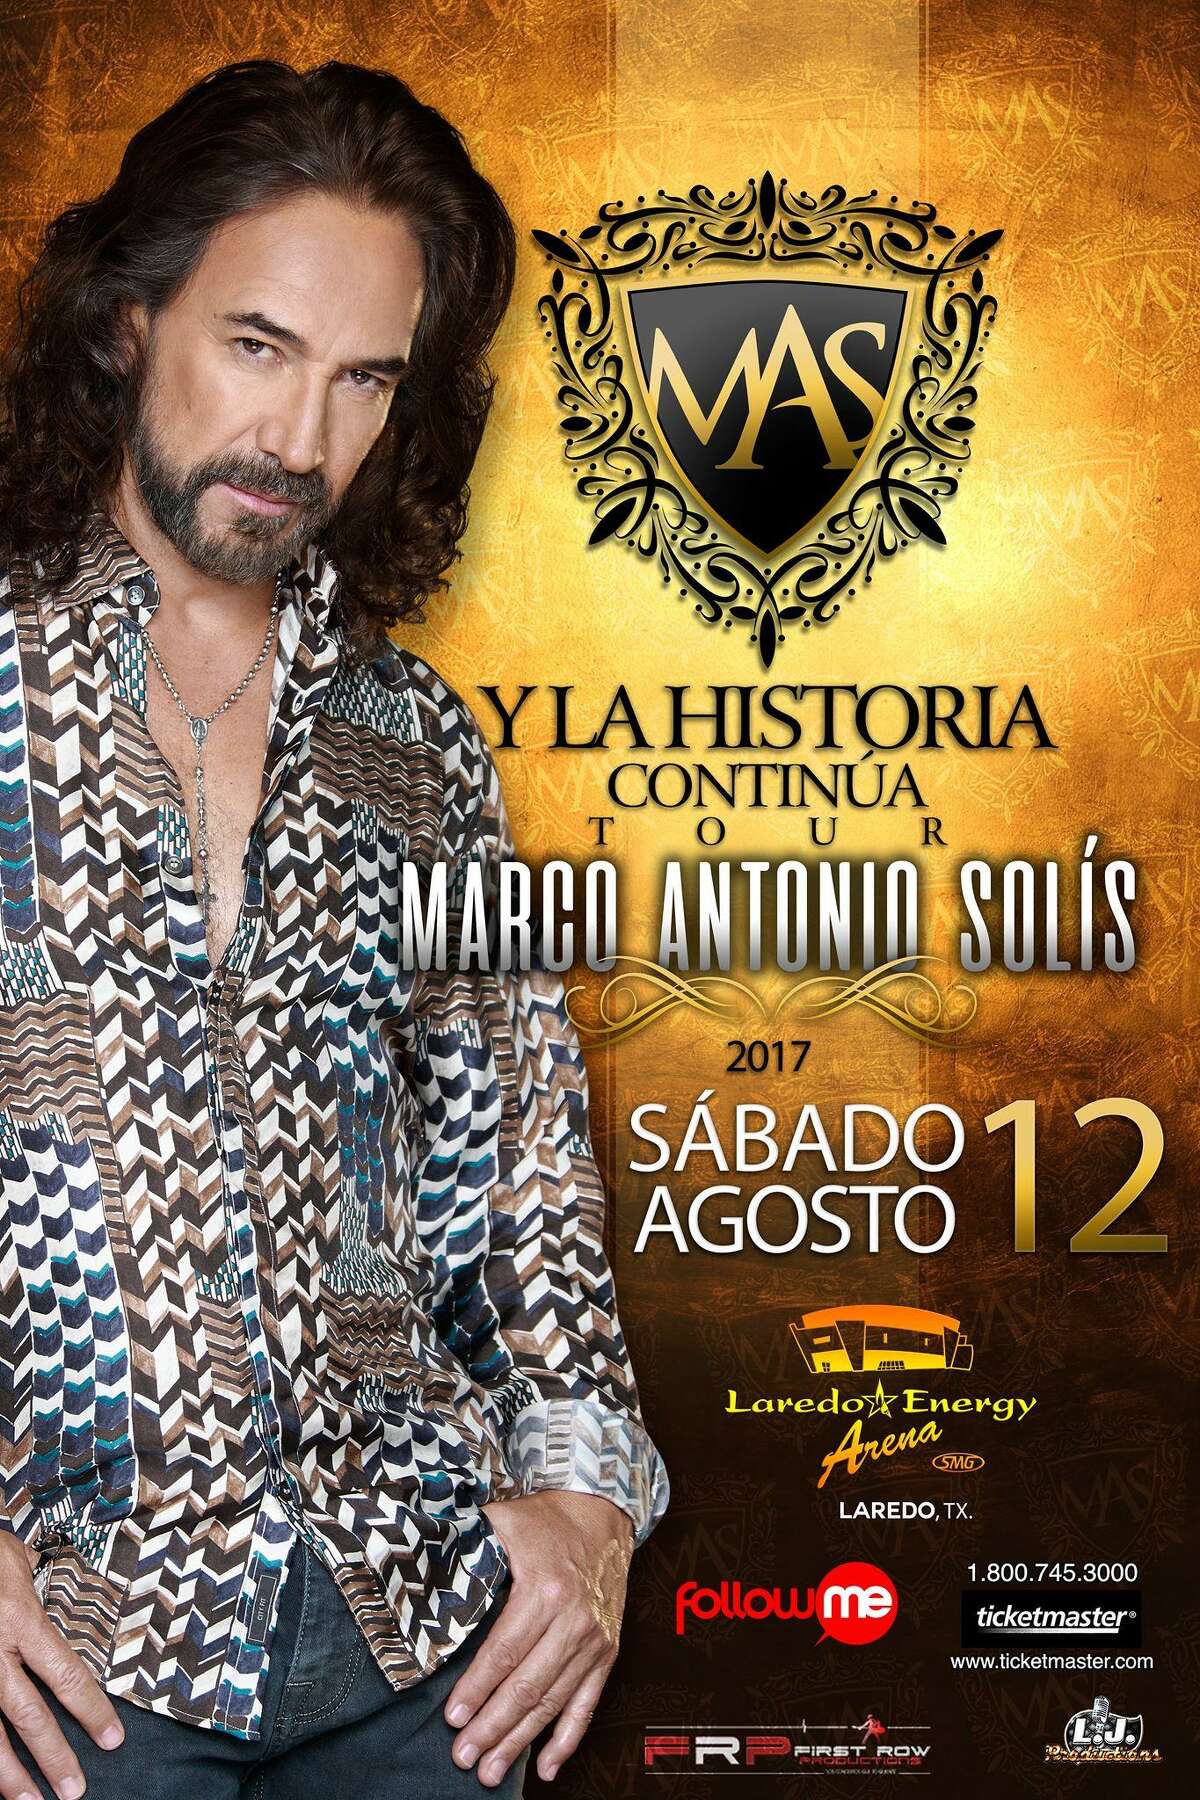 Singer Marco Antonio Solis will be coming to the Gateway City in August. Keep clicking through the gallery to see other big shows coming to Laredo.